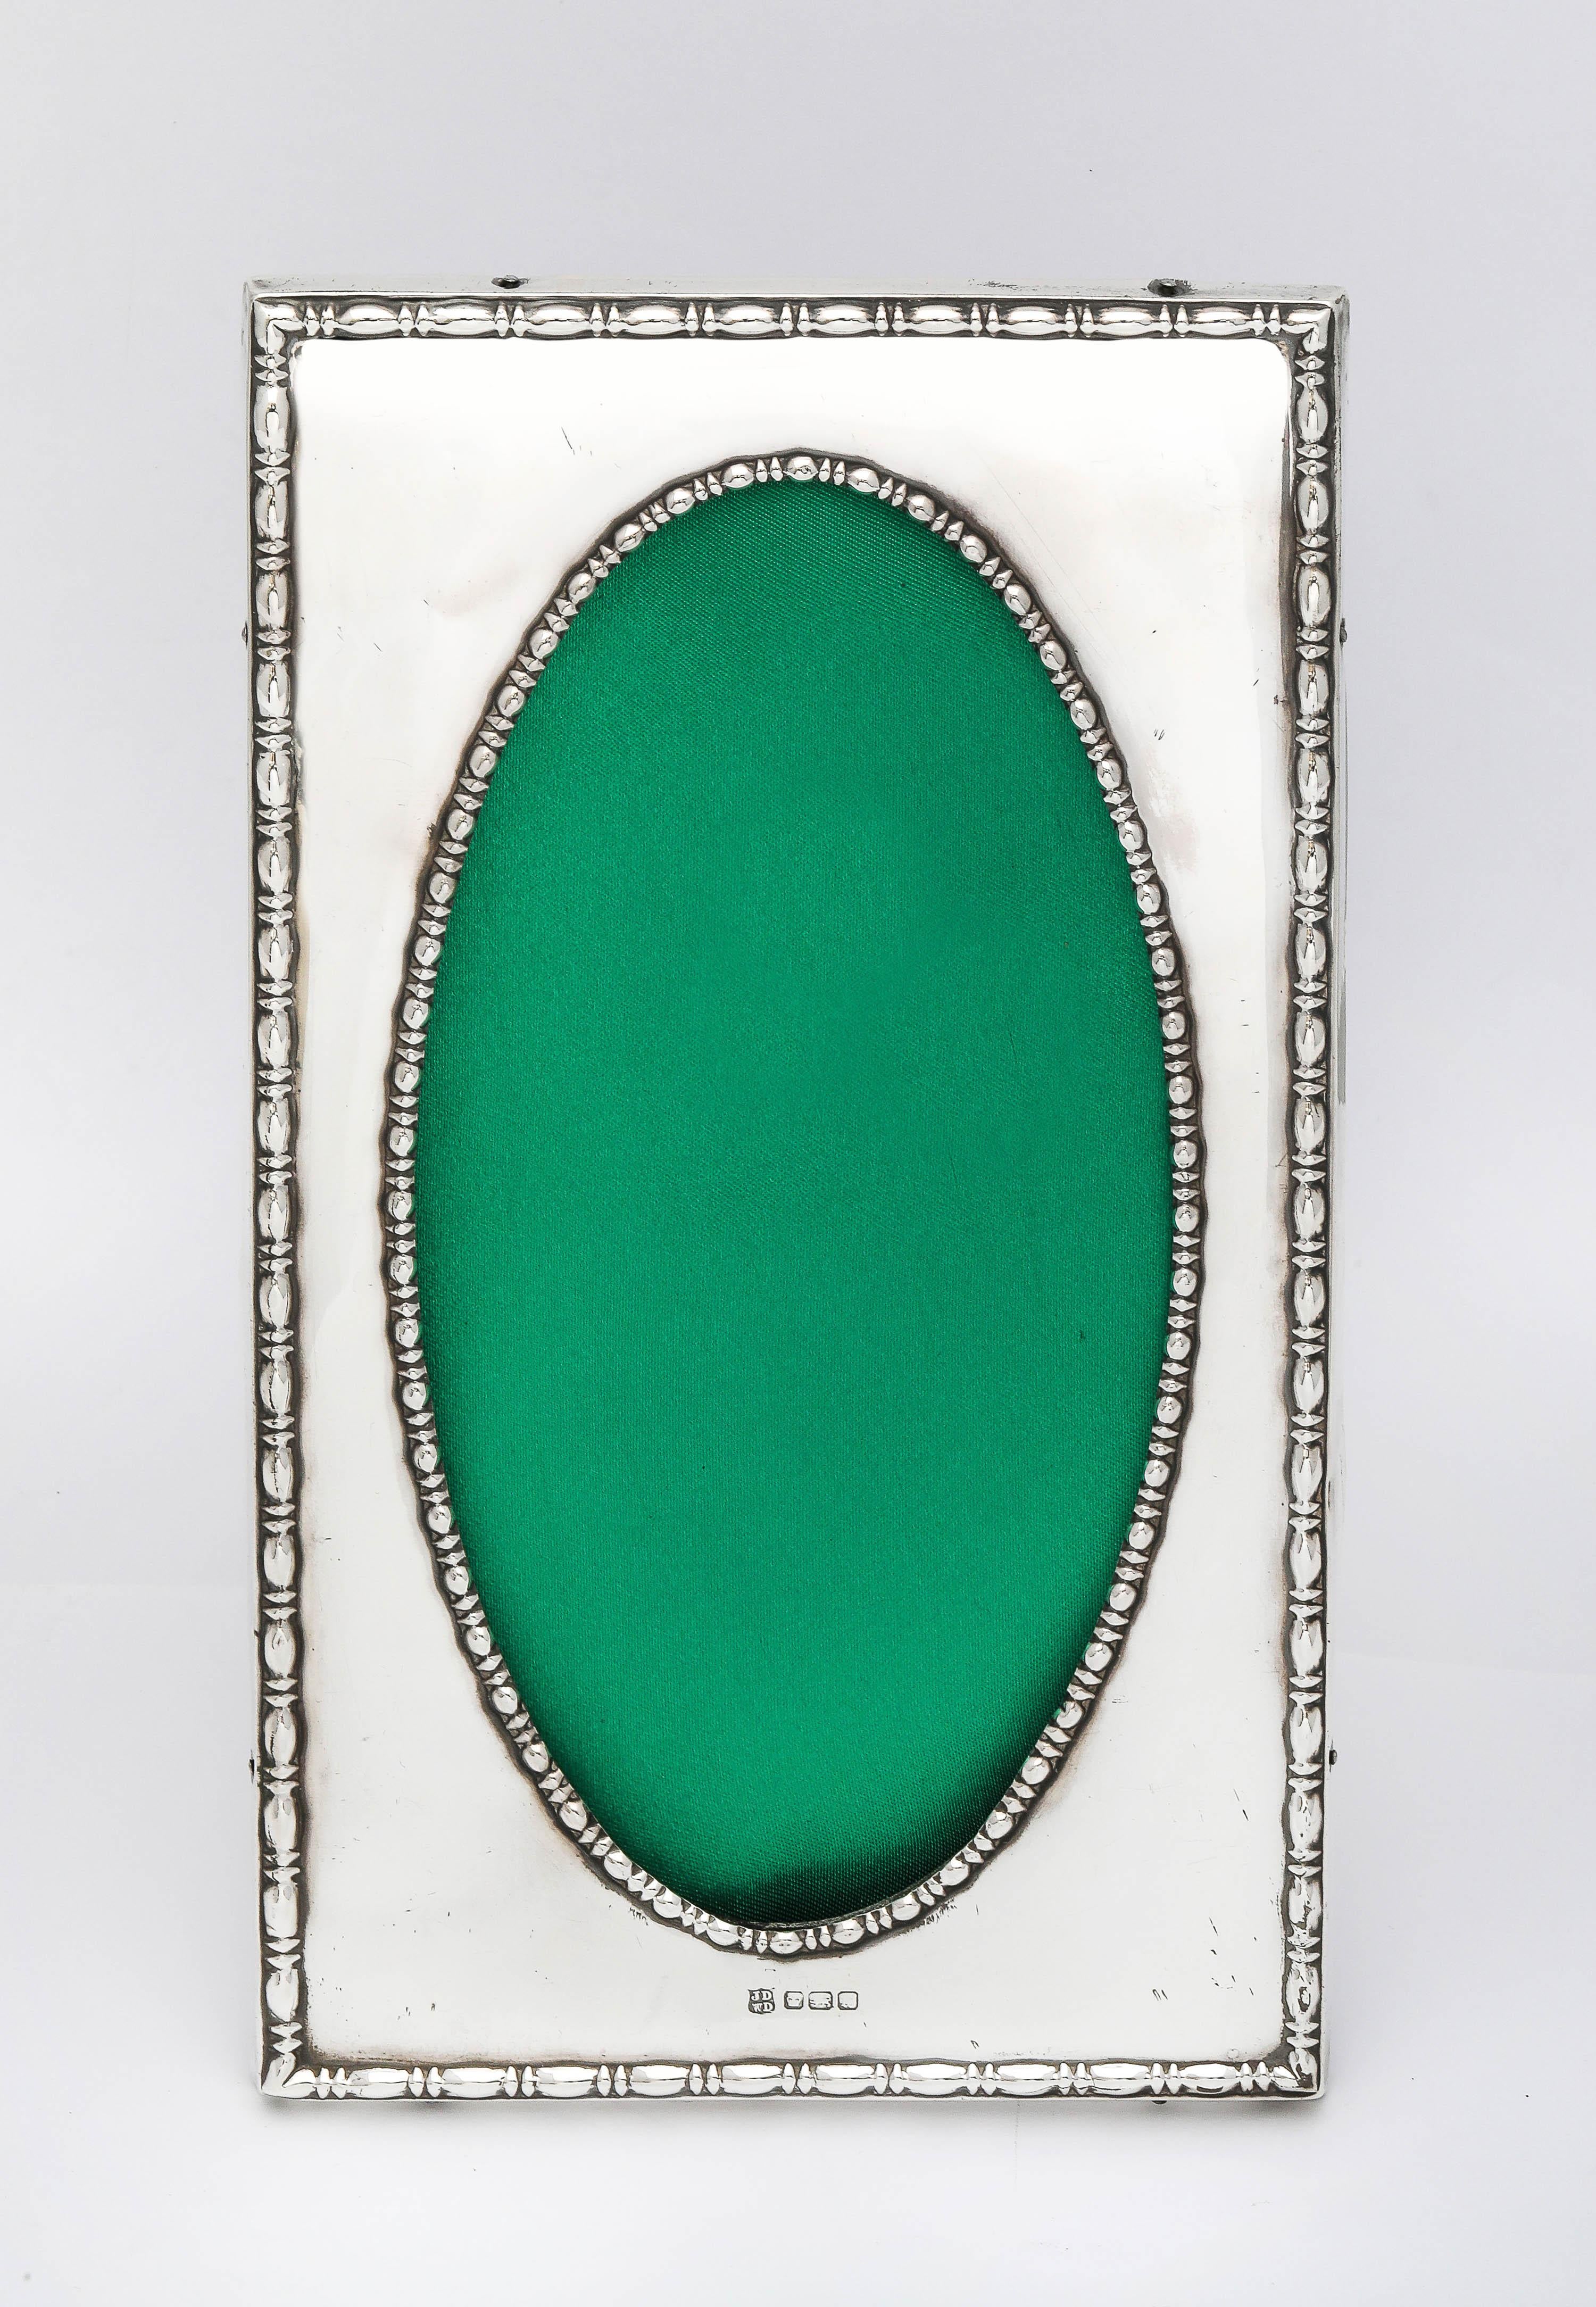 Unusual, tall, Edwardian Period, sterling silver, wood-backed picture frame, Sheffield, England, year-hallmarked for 1914, James Deakin and Sons (John and William F. Deakin) - makers. The frame will stand both horizontally and vertically. The frame